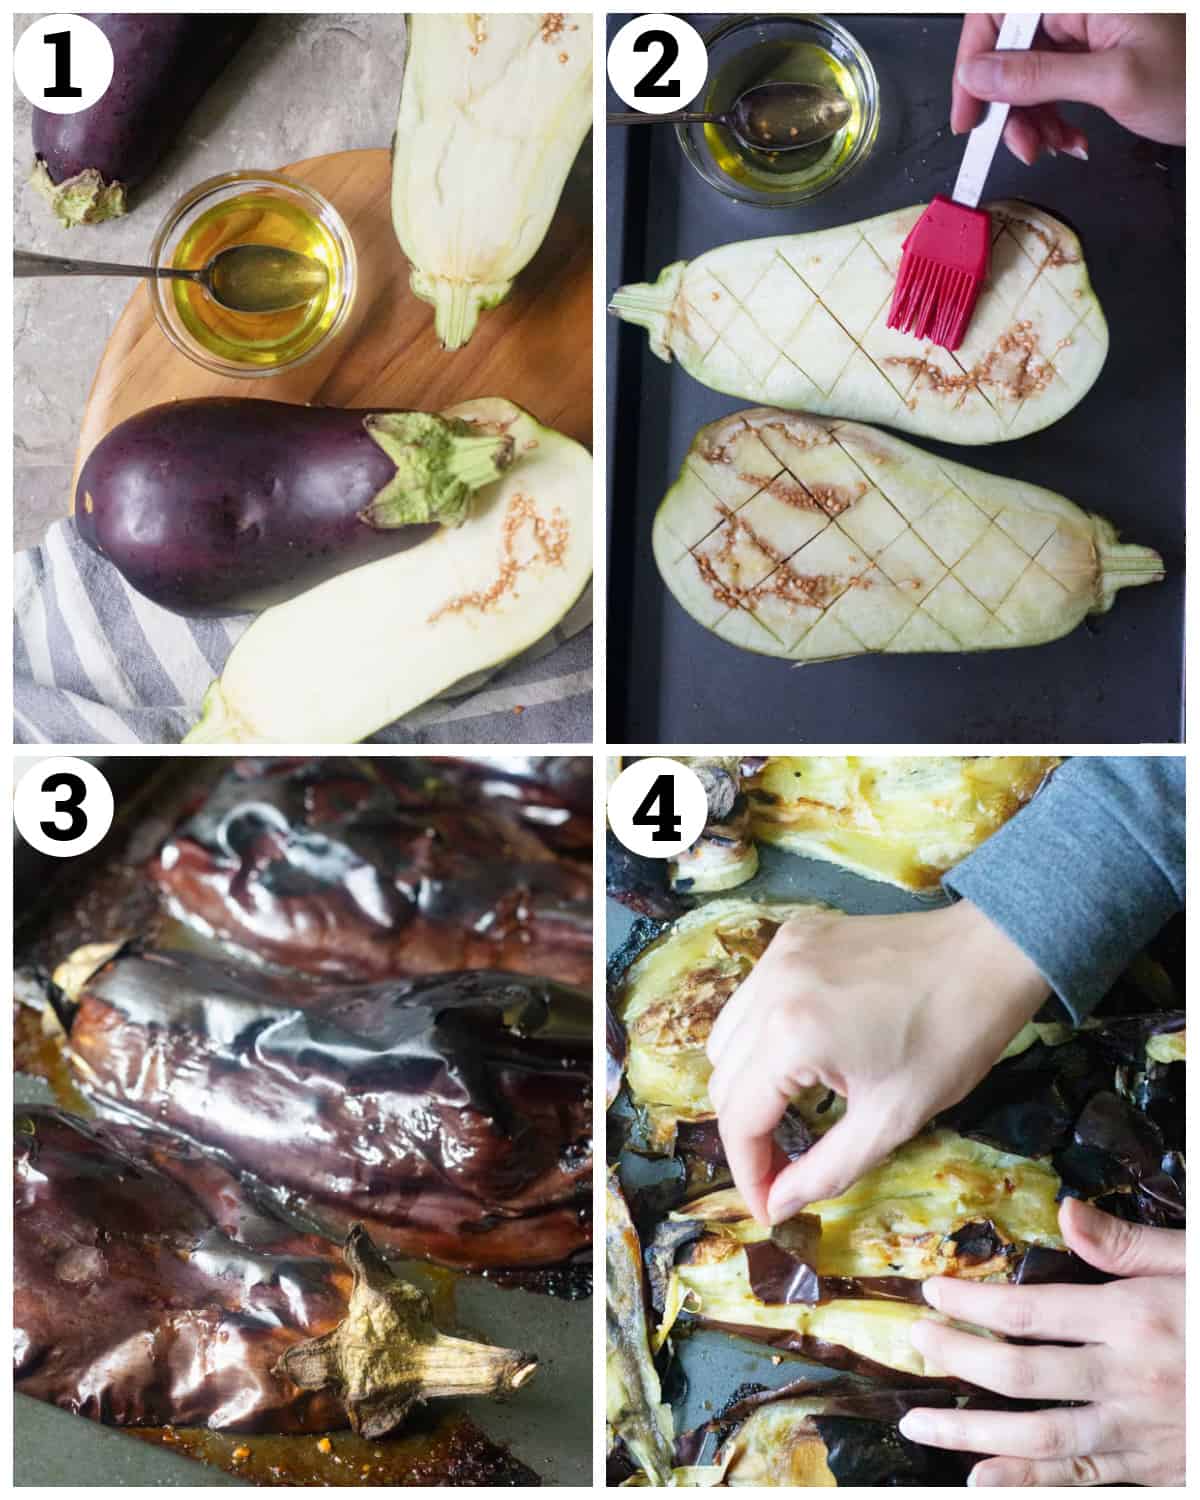 Wash and dry the eggplants and cut in half. Cut diamonds in each piece and roast in the oven. 